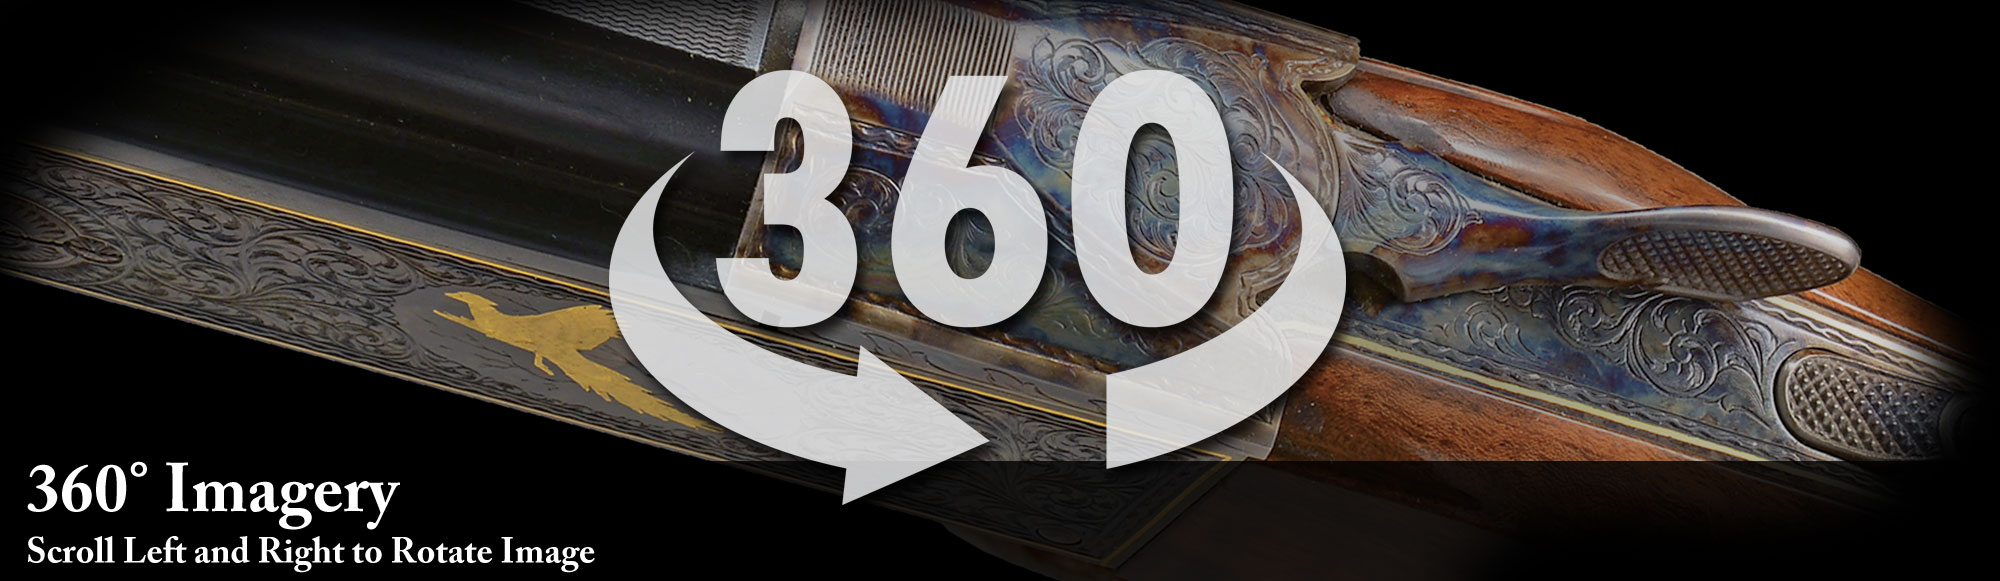 360-Imagery_banner